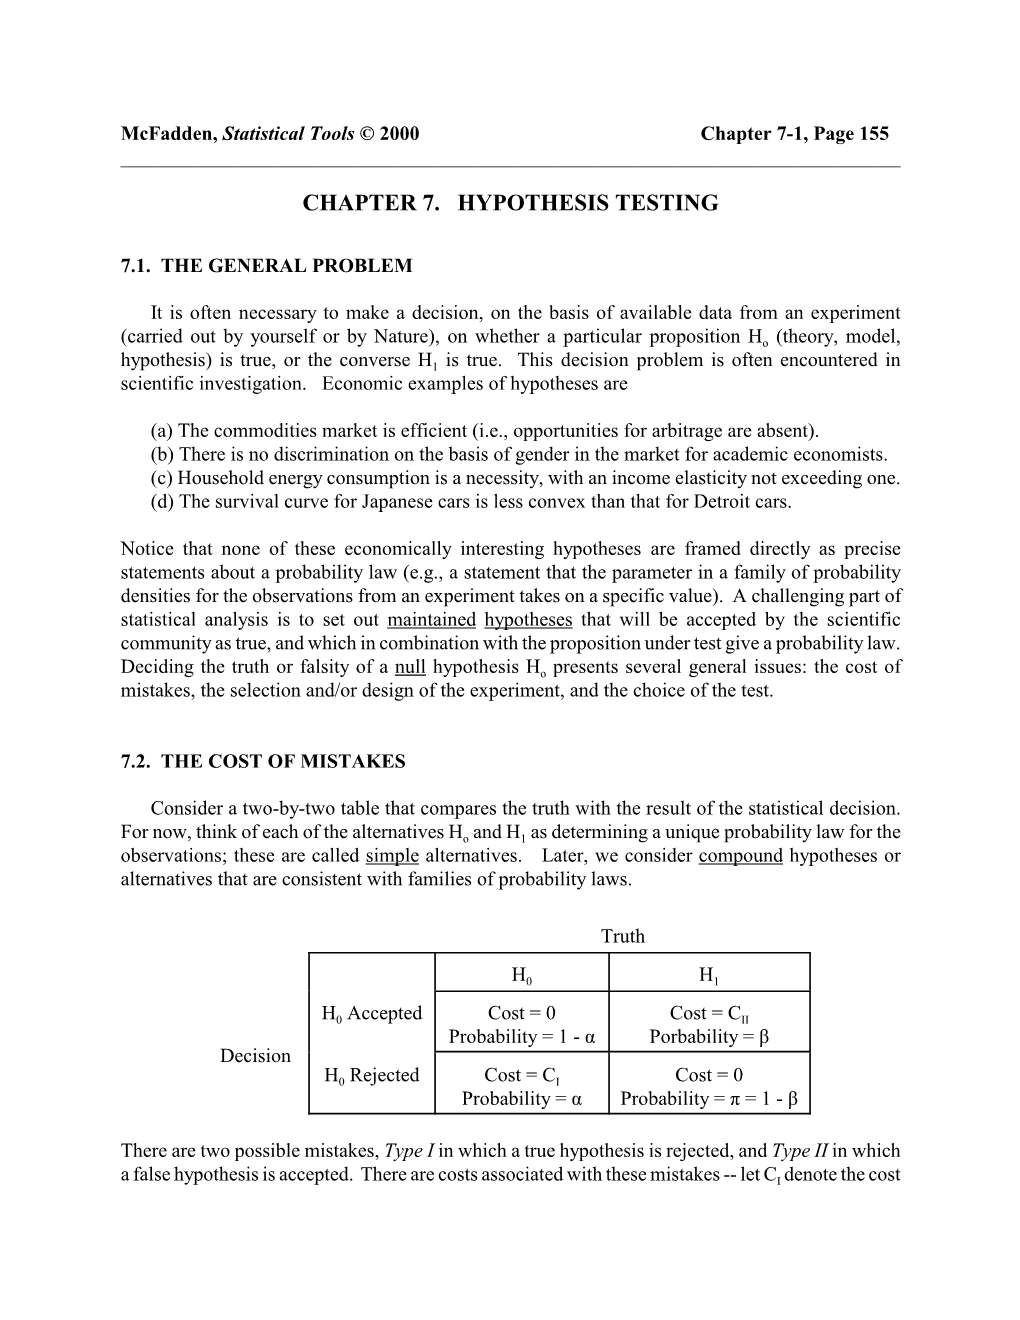 Chapter 7. Hypothesis Testing